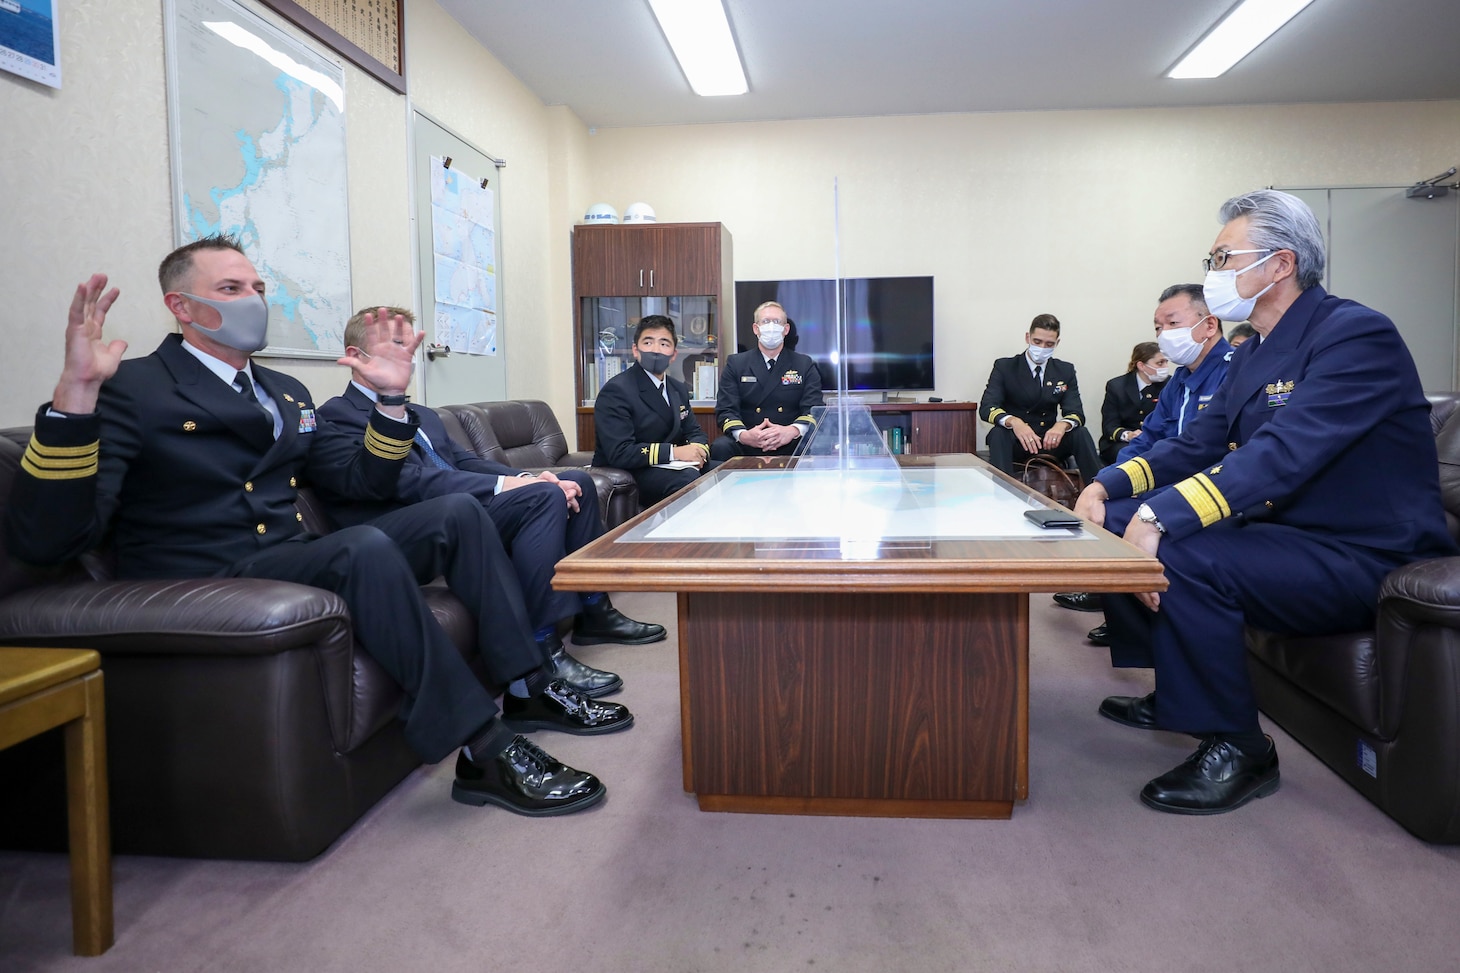 HAKODATE, Japan (Oct. 7, 2022) Cmdr. Marcus Seeger, commanding officer of Arleigh Burke-class guided-missile destroyer USS Benfold (DDG 65), meets with Japan Coast Guard Branch Chief Ikegami Katsuhiro and other members of the Japan Coast Guard during a scheduled port visit, Oct. 7. U.S. Consulate General Sapporo Principal Officer Mark Wuebbels joined the meetings. Benfold is assigned to Commander, Task Force 71/Destroyer Squadron (DESRON) 15, the Navy’s largest forward-deployed DESRON and the U.S. 7th Fleet’s principal surface force. (U.S. Navy photo by Mass Communication Specialist 2nd Class Arthur Rosen)